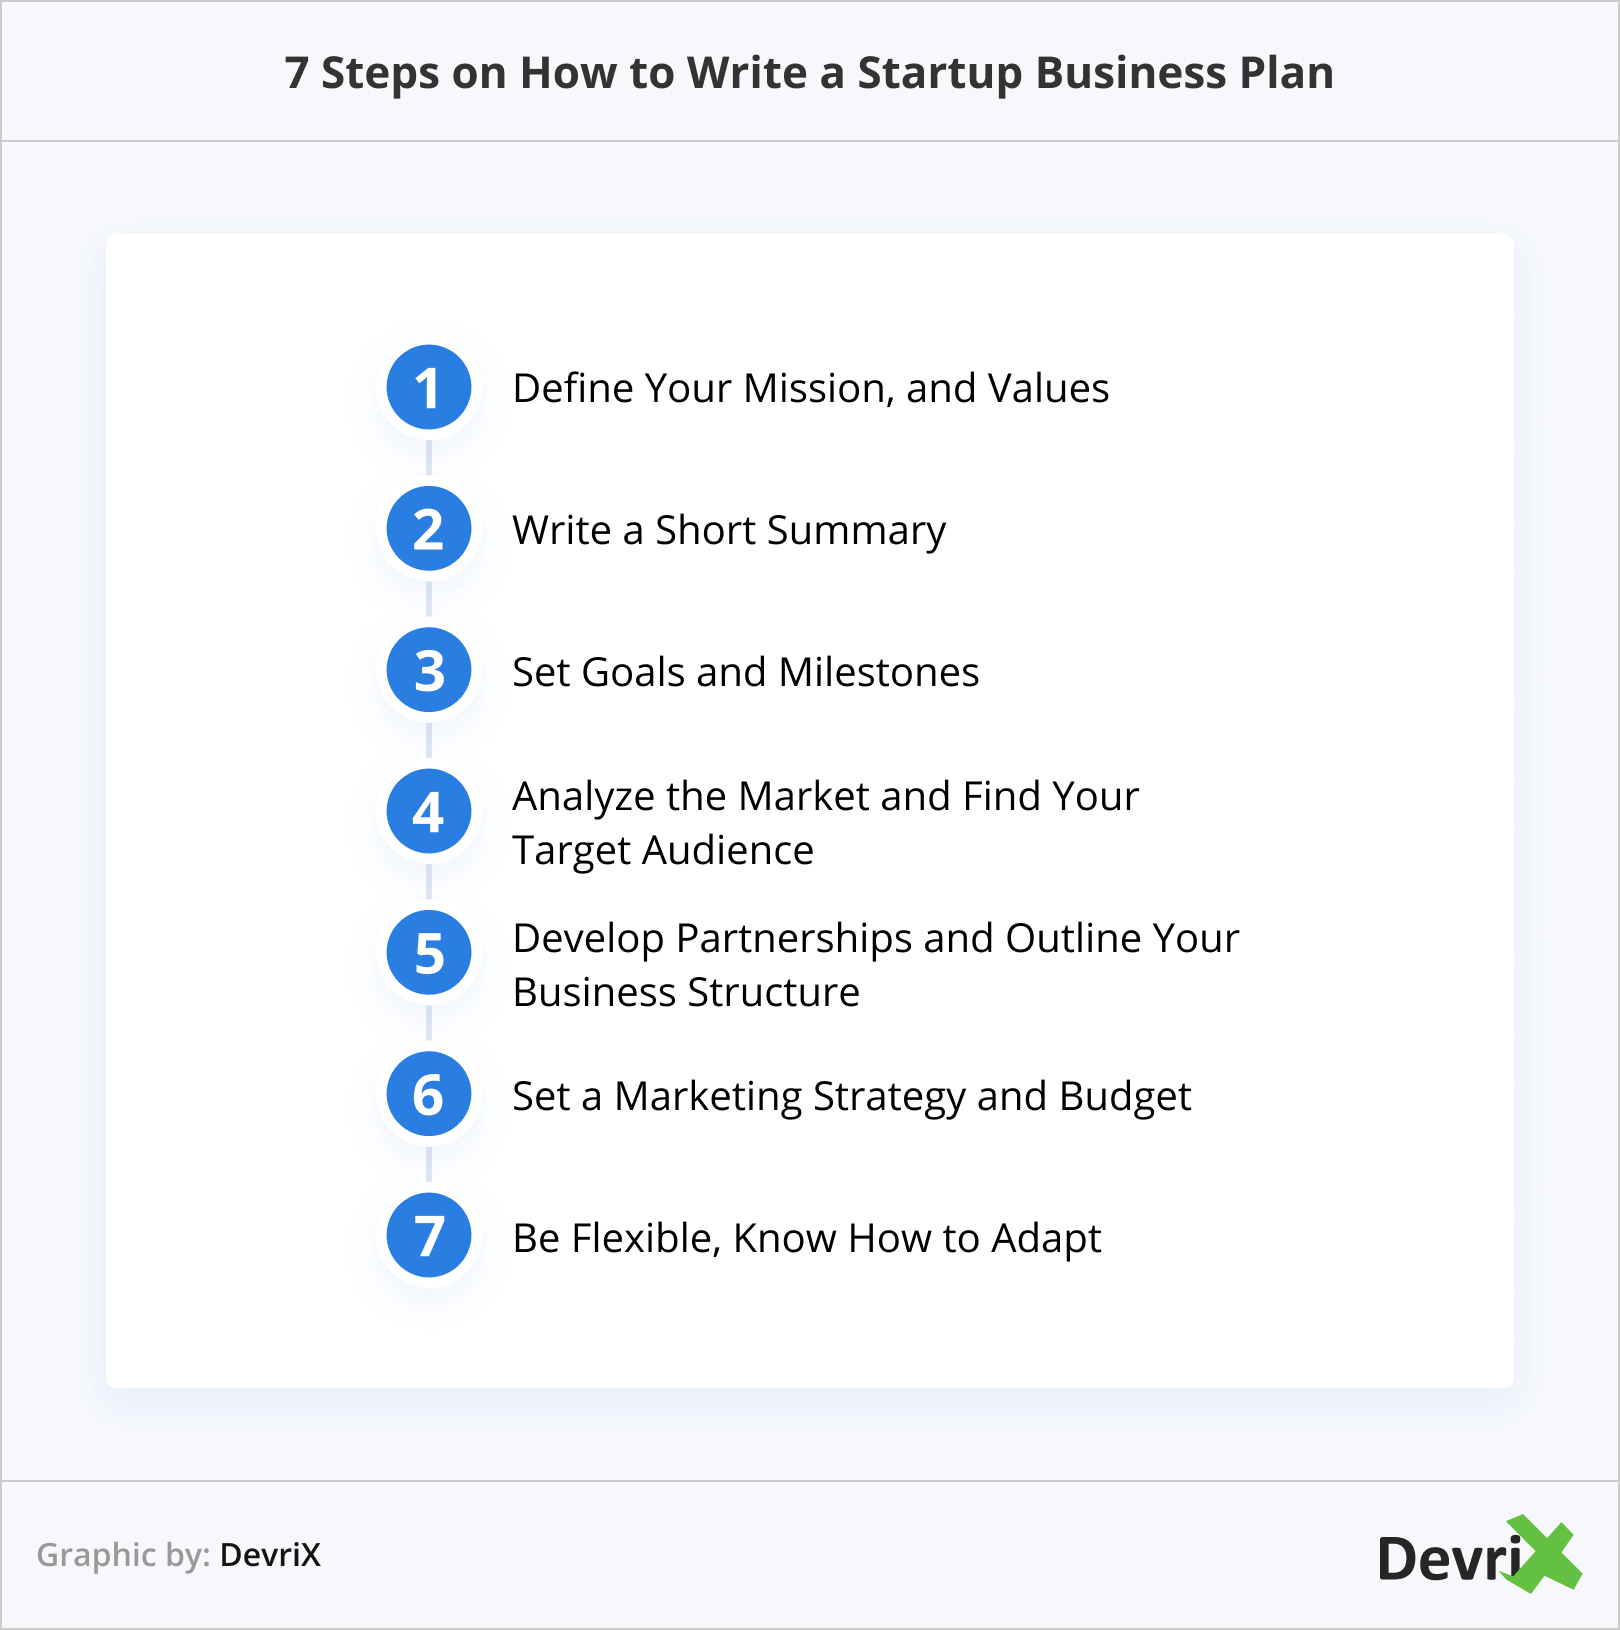 7 Steps on How to Write a Startup Business Plan-1